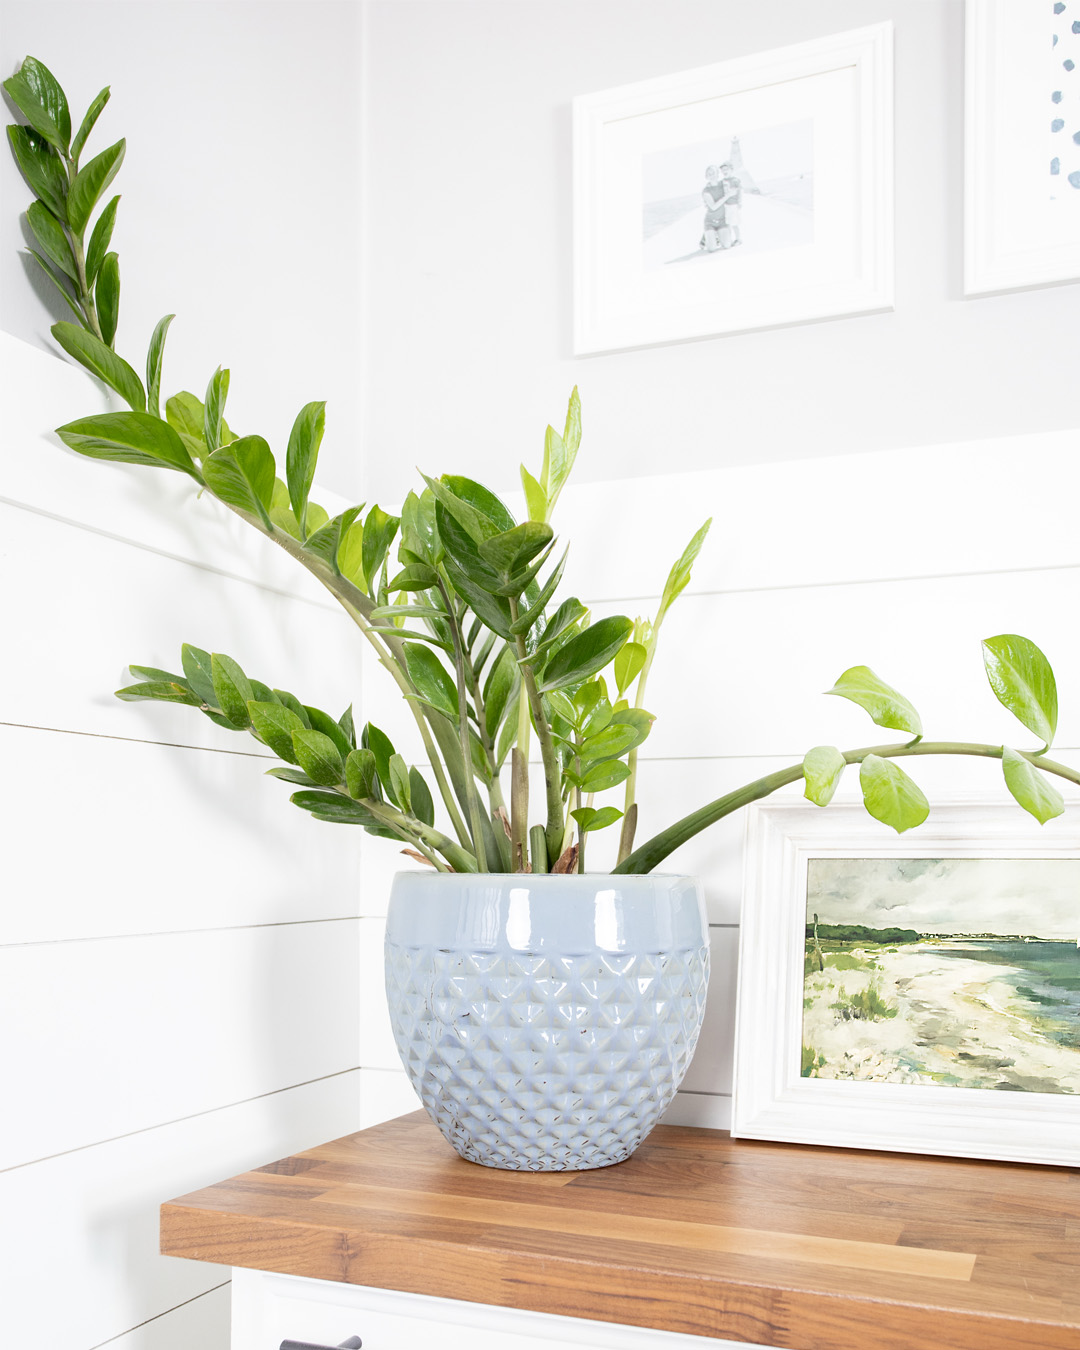 Placing plants around your house can be so helpful for your mood and energy during the colder months. Here are my favourite houseplants to beat the winter blahs!